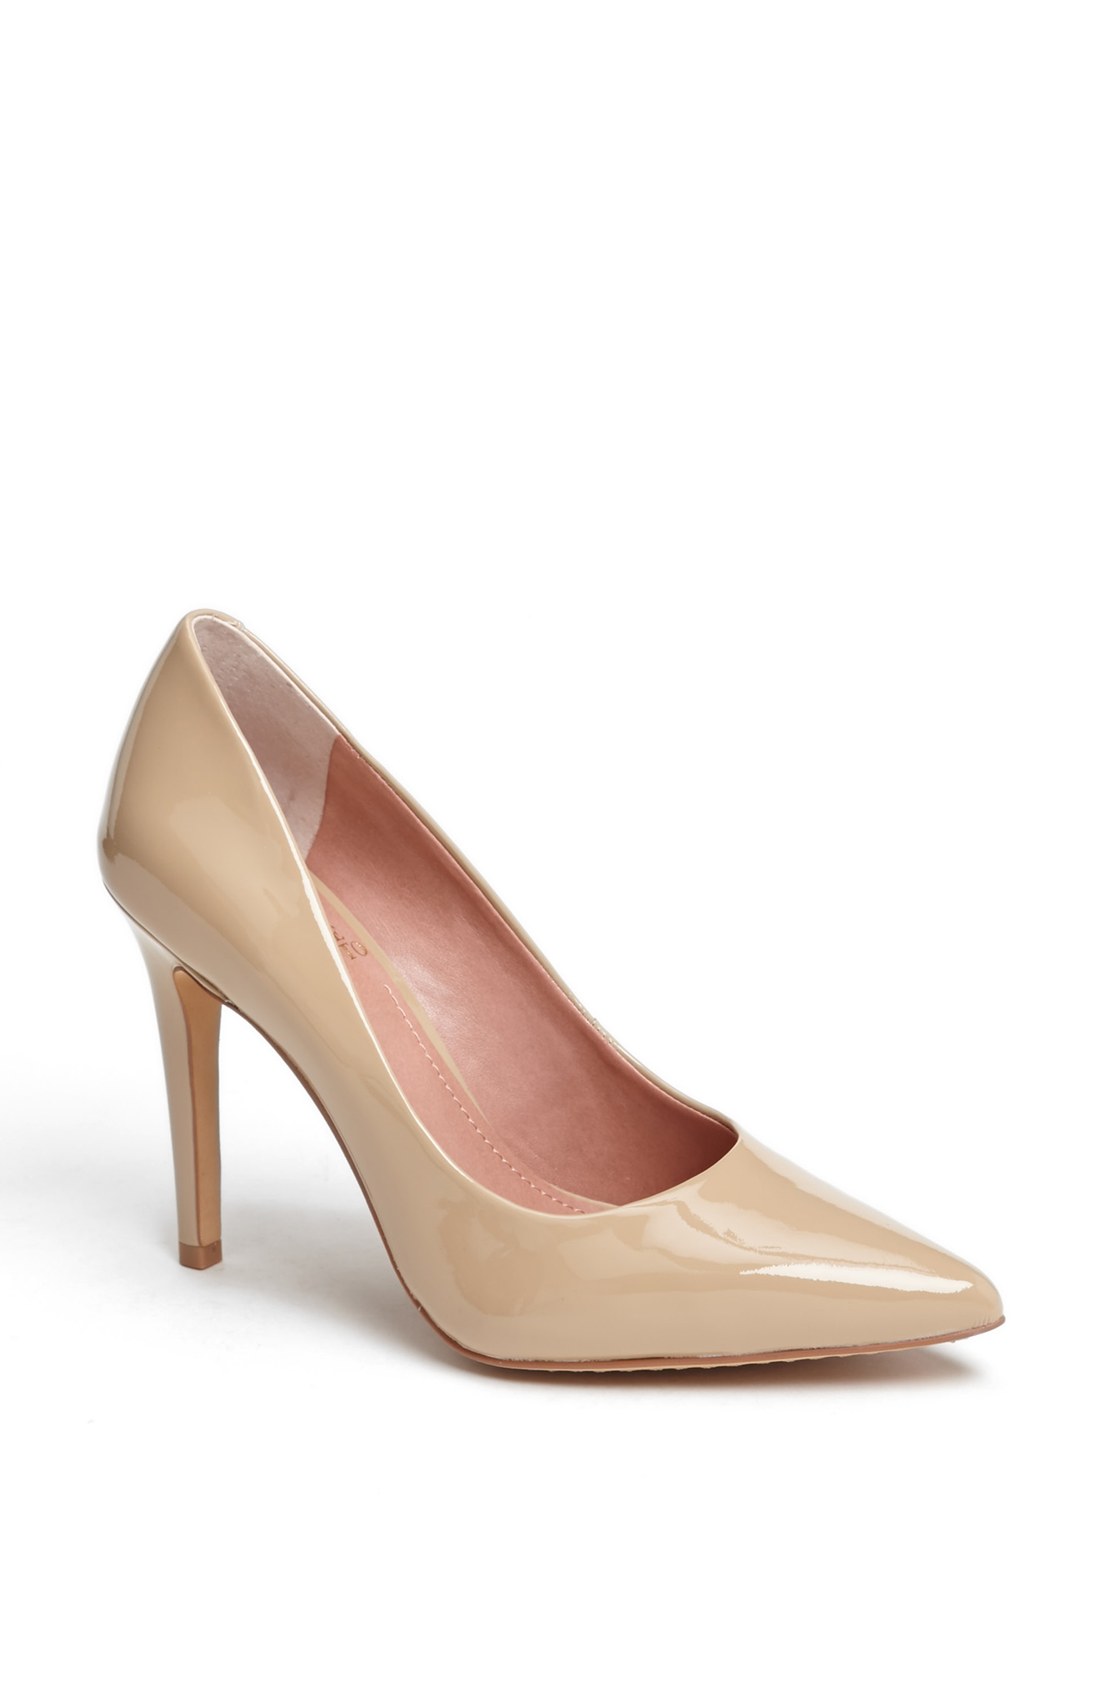 Vince Camuto 'Kain' Pump in Beige (Blush Patent) | Lyst